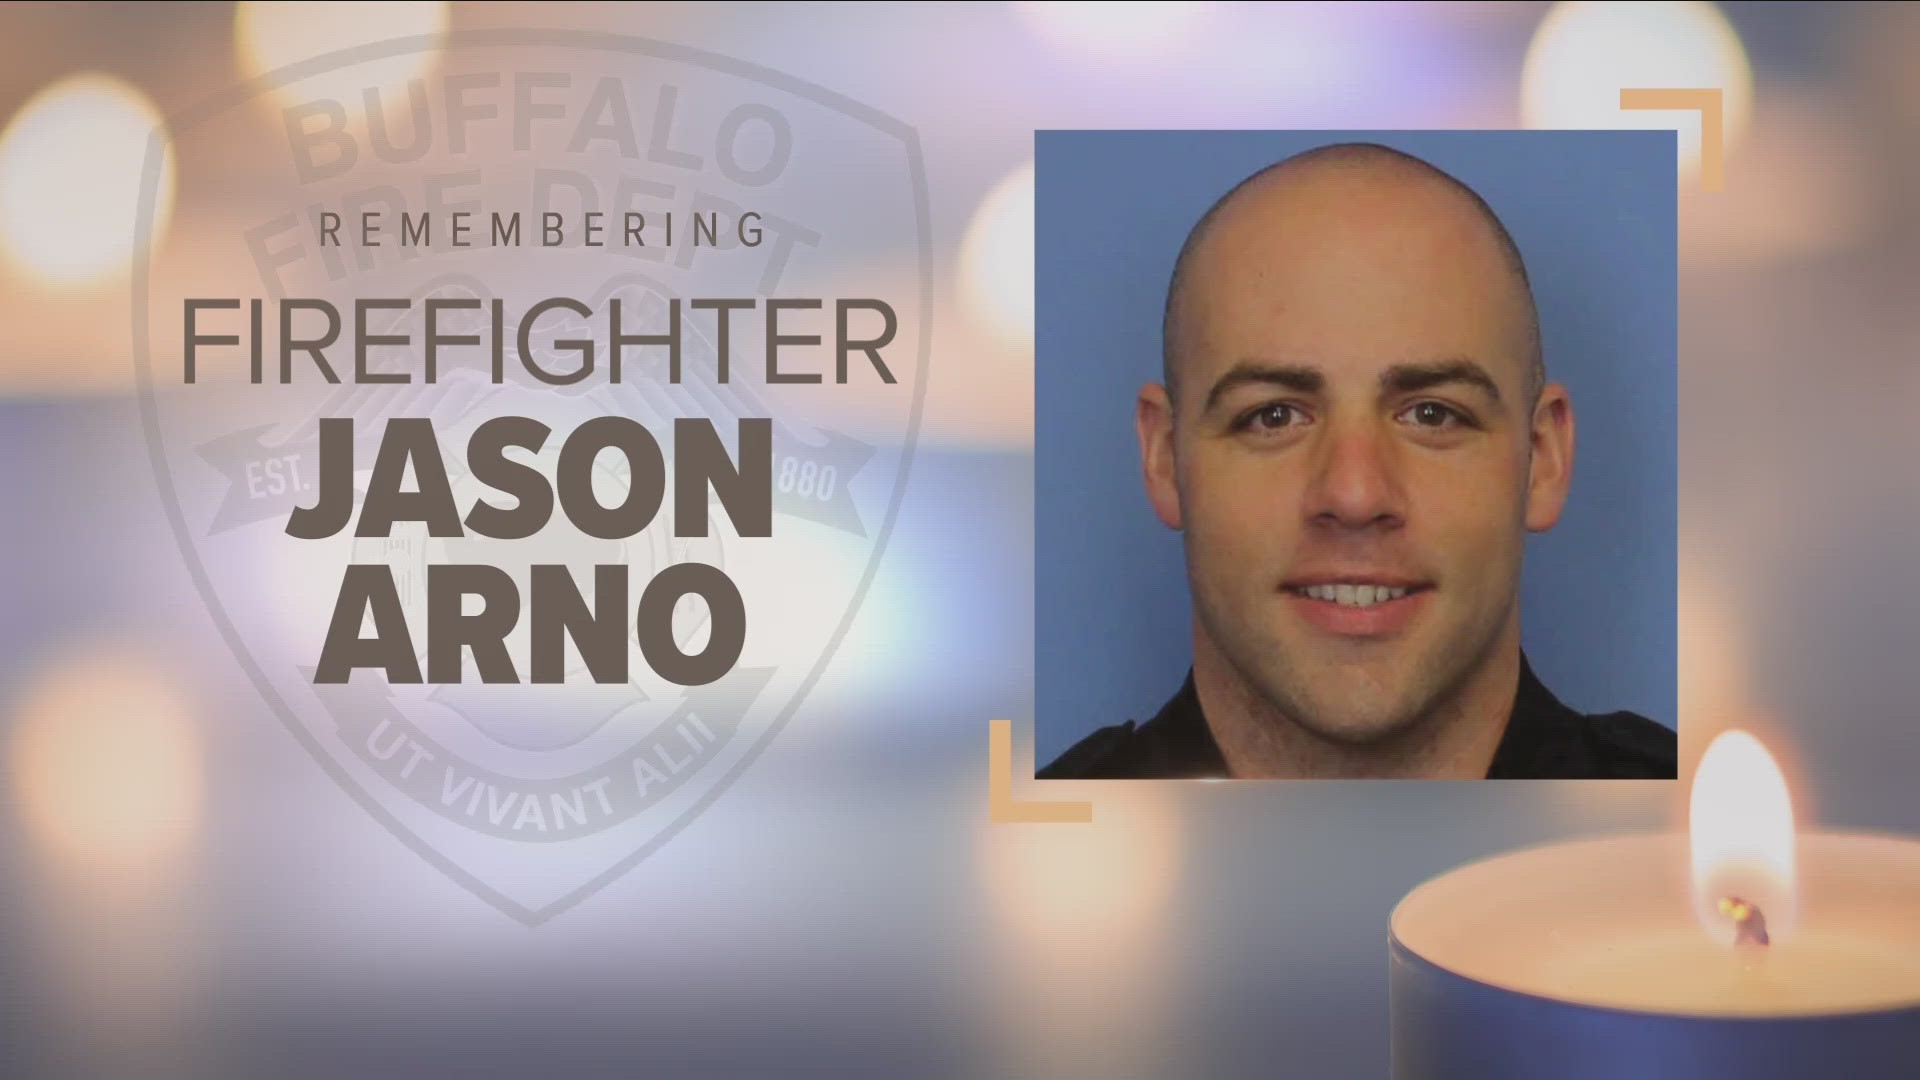 In the days since Firefighter Jason Arno's passing March first, we've learned more about the man he was and the legacy he leaves behind.